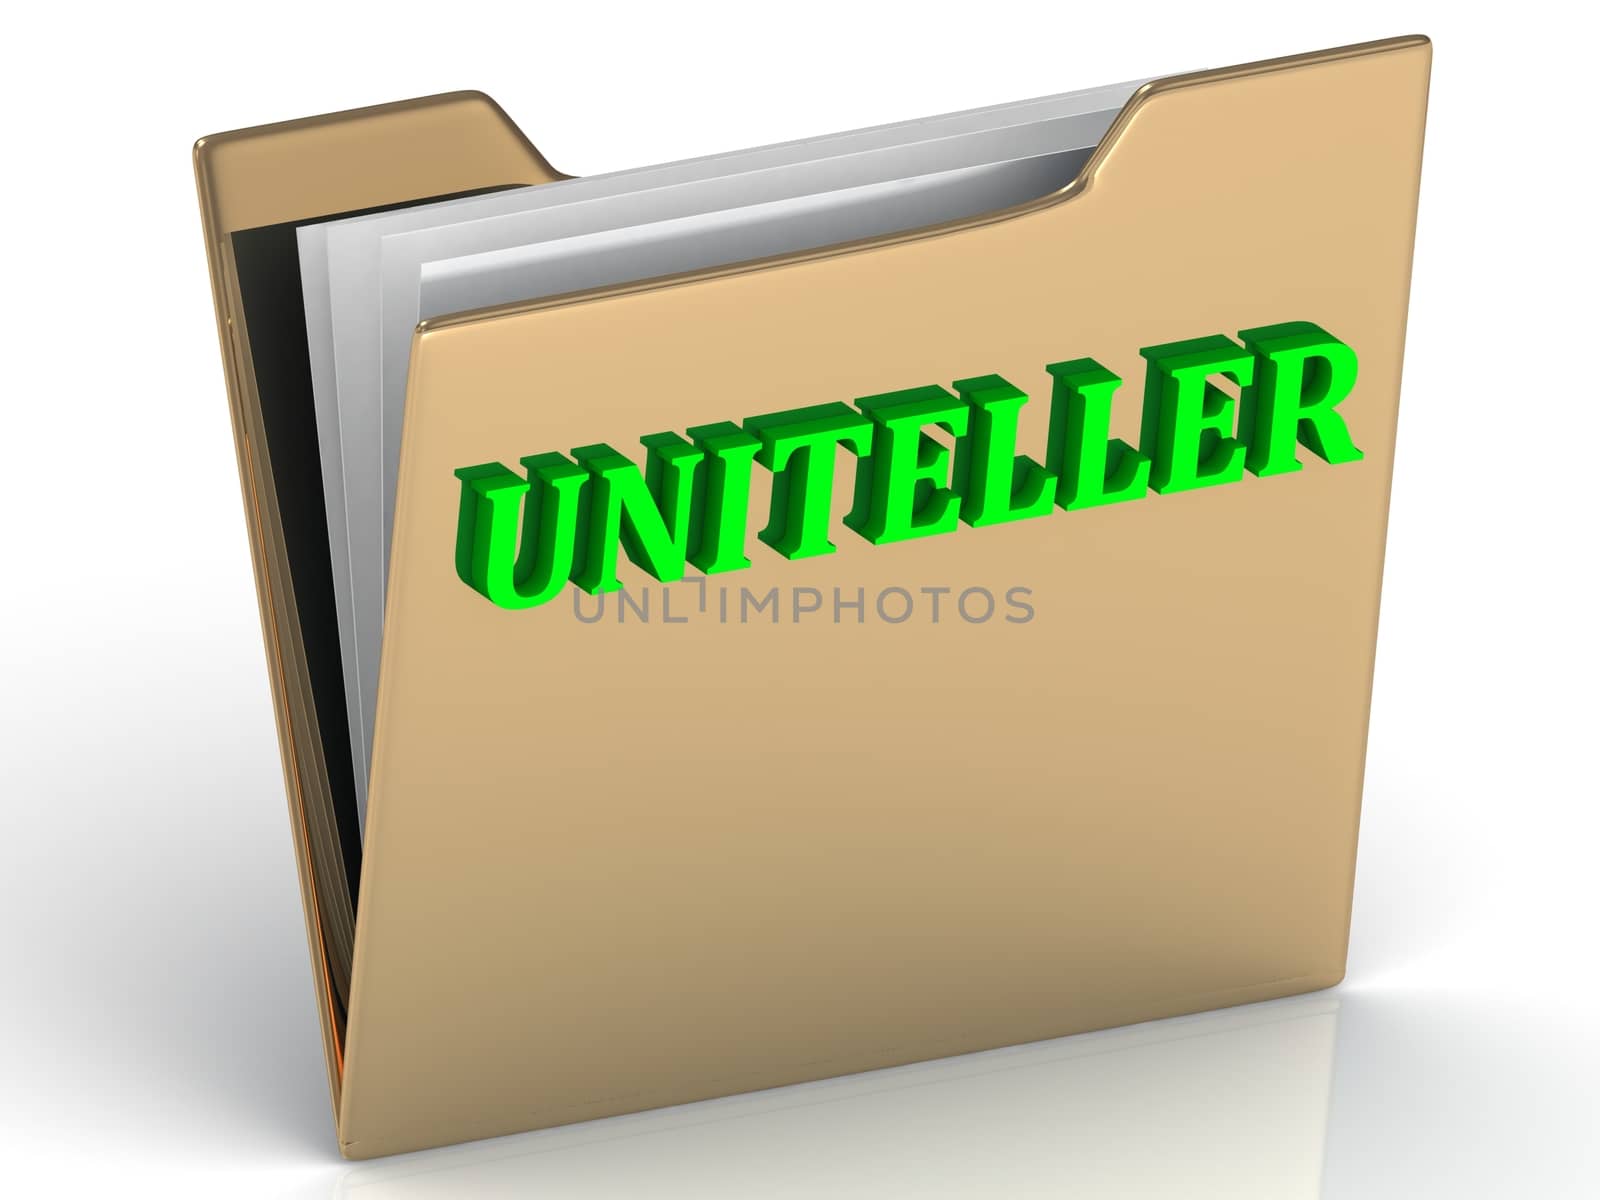 UNITELLER- bright letters on a gold folder on by GreenMost